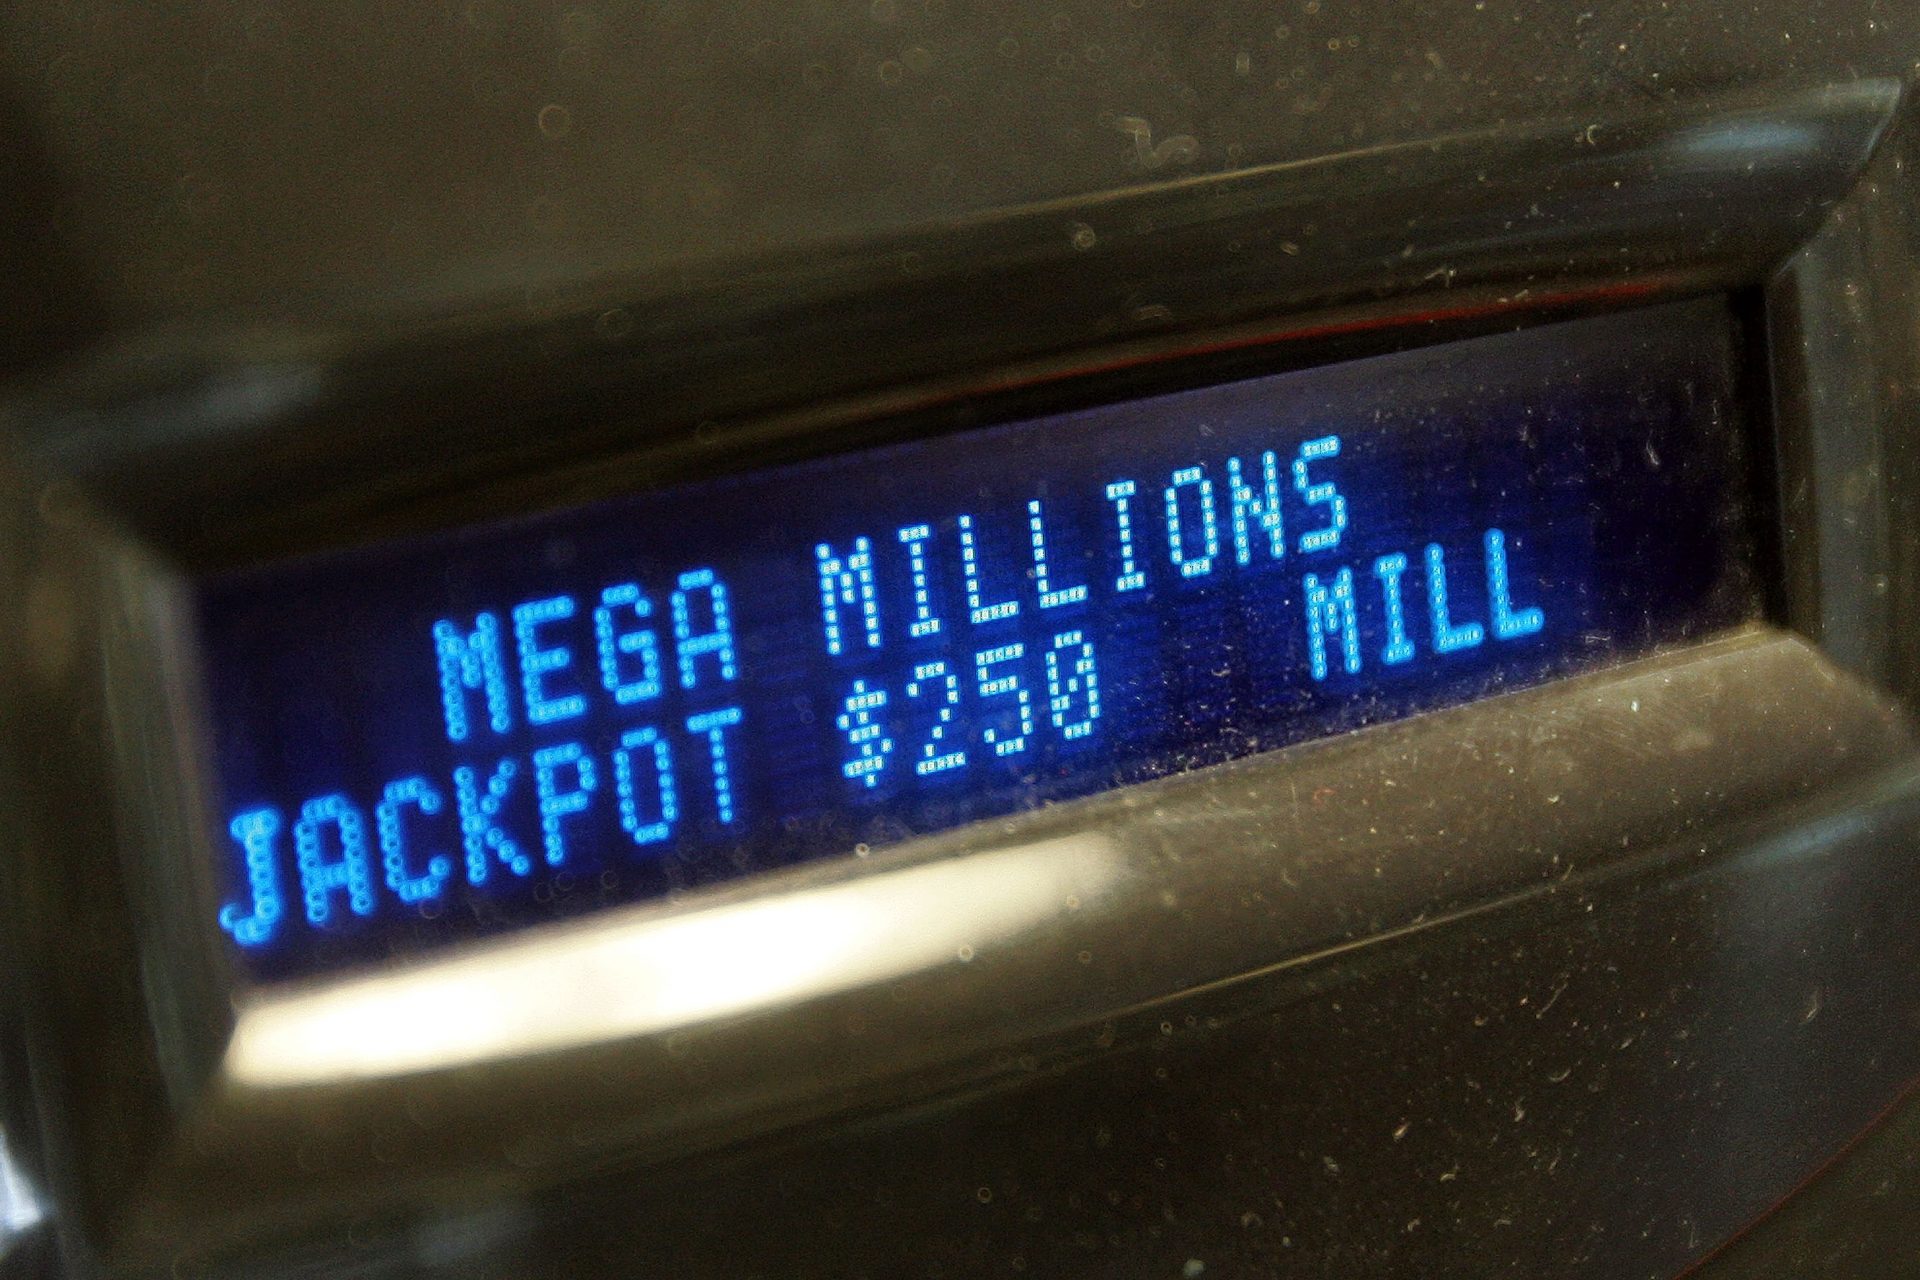 They lost it all: lottery winners who couldn't handle their fortune